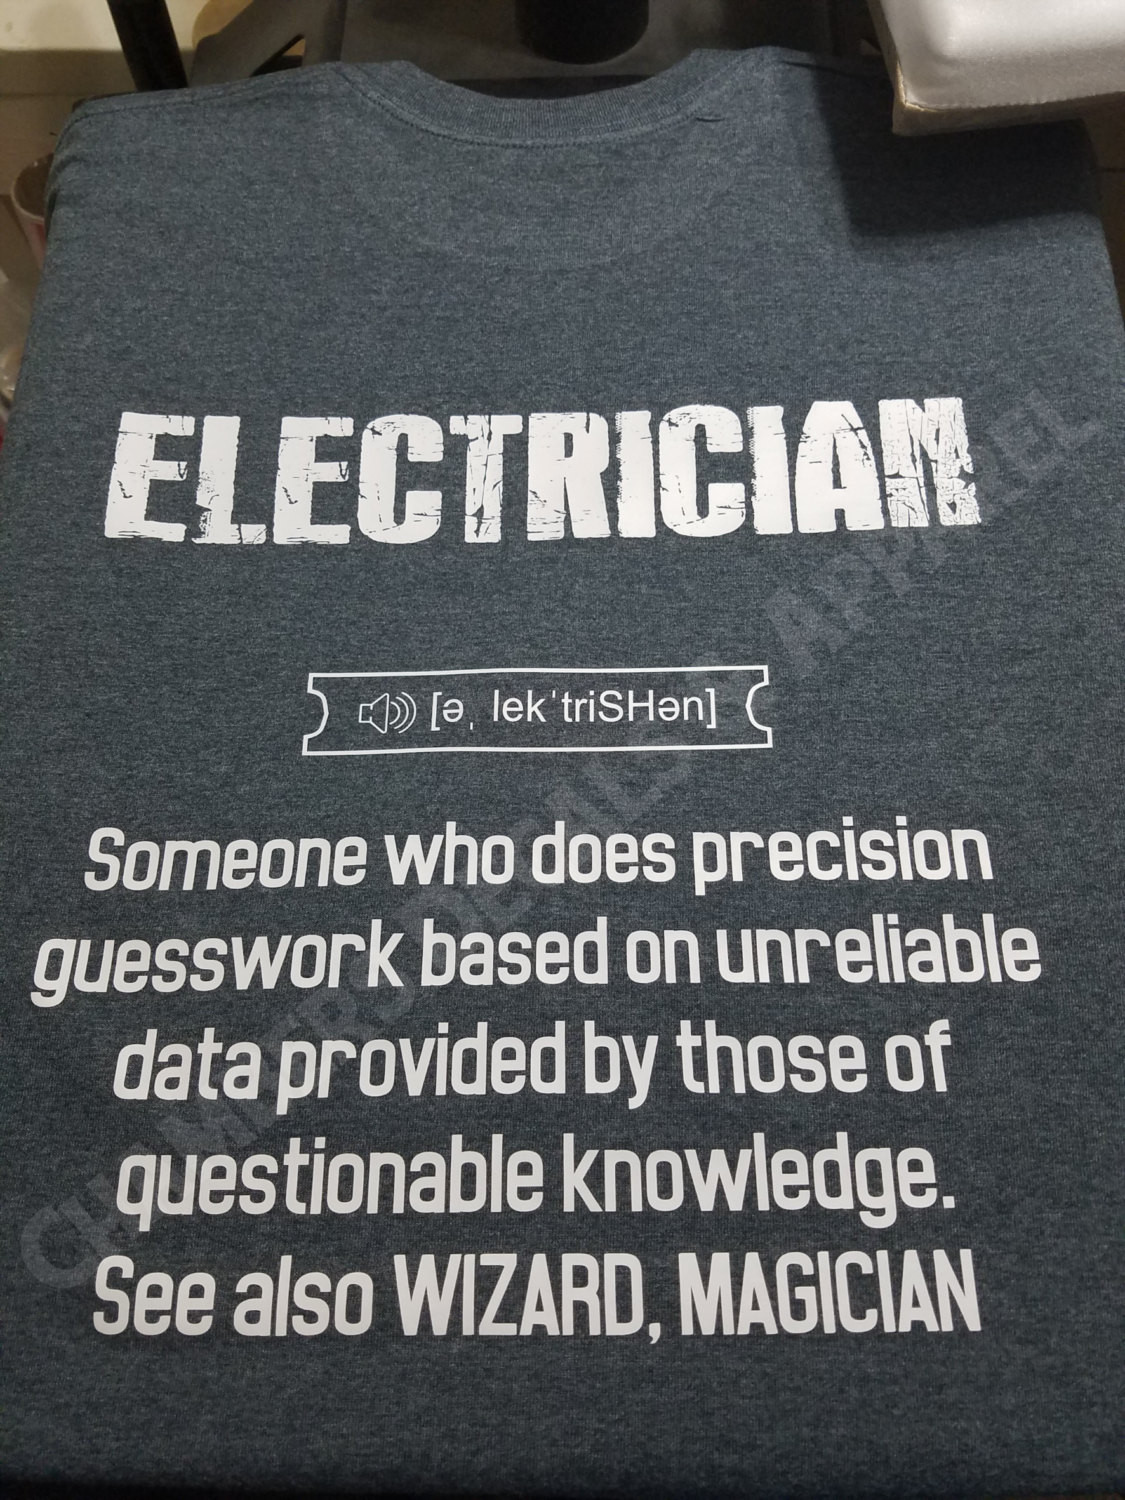 Funny Electrician Quotes
 Magician Electrician Tee